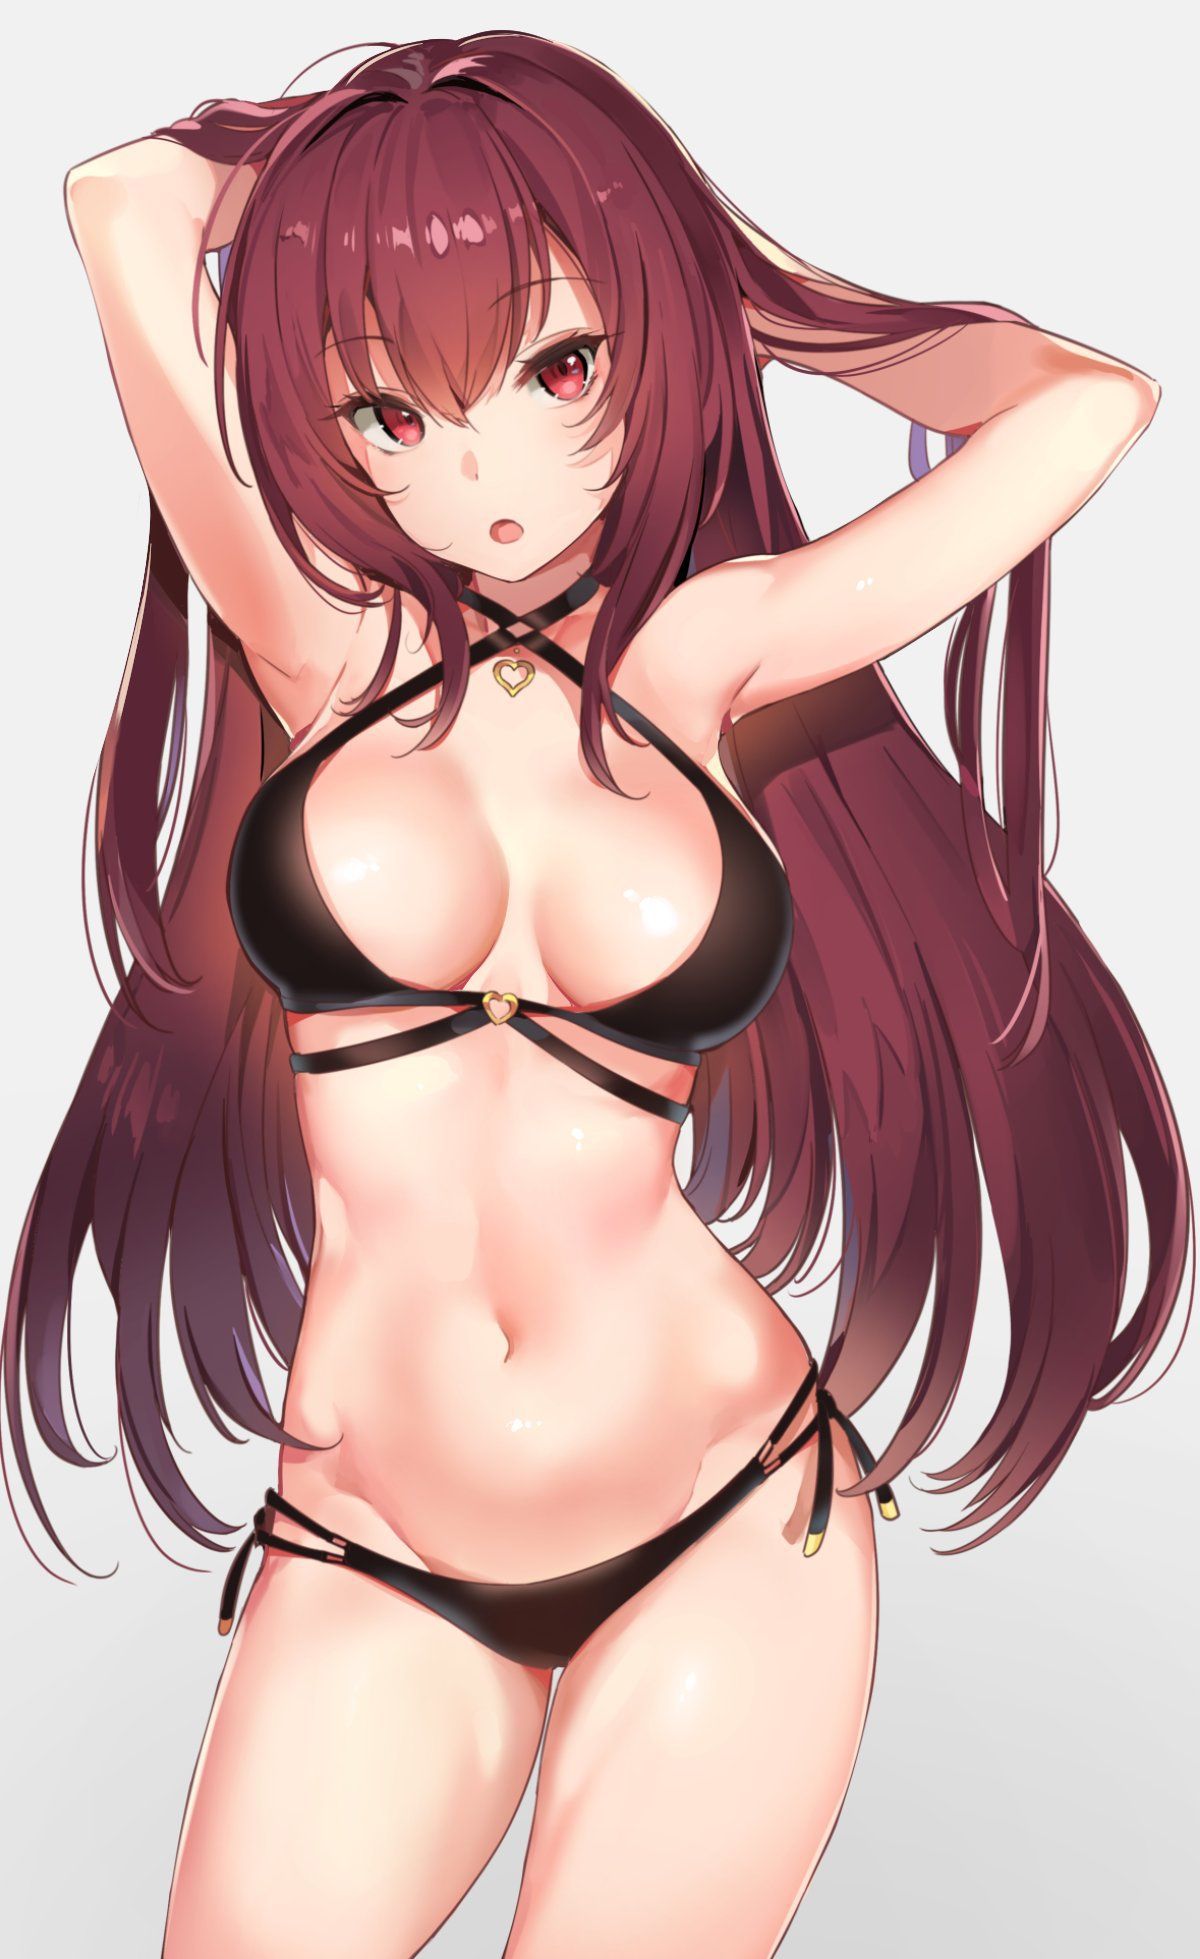 [2nd] secondary image of a cool girl wearing a swimsuit part 4 [non-erotic swimsuit] 8